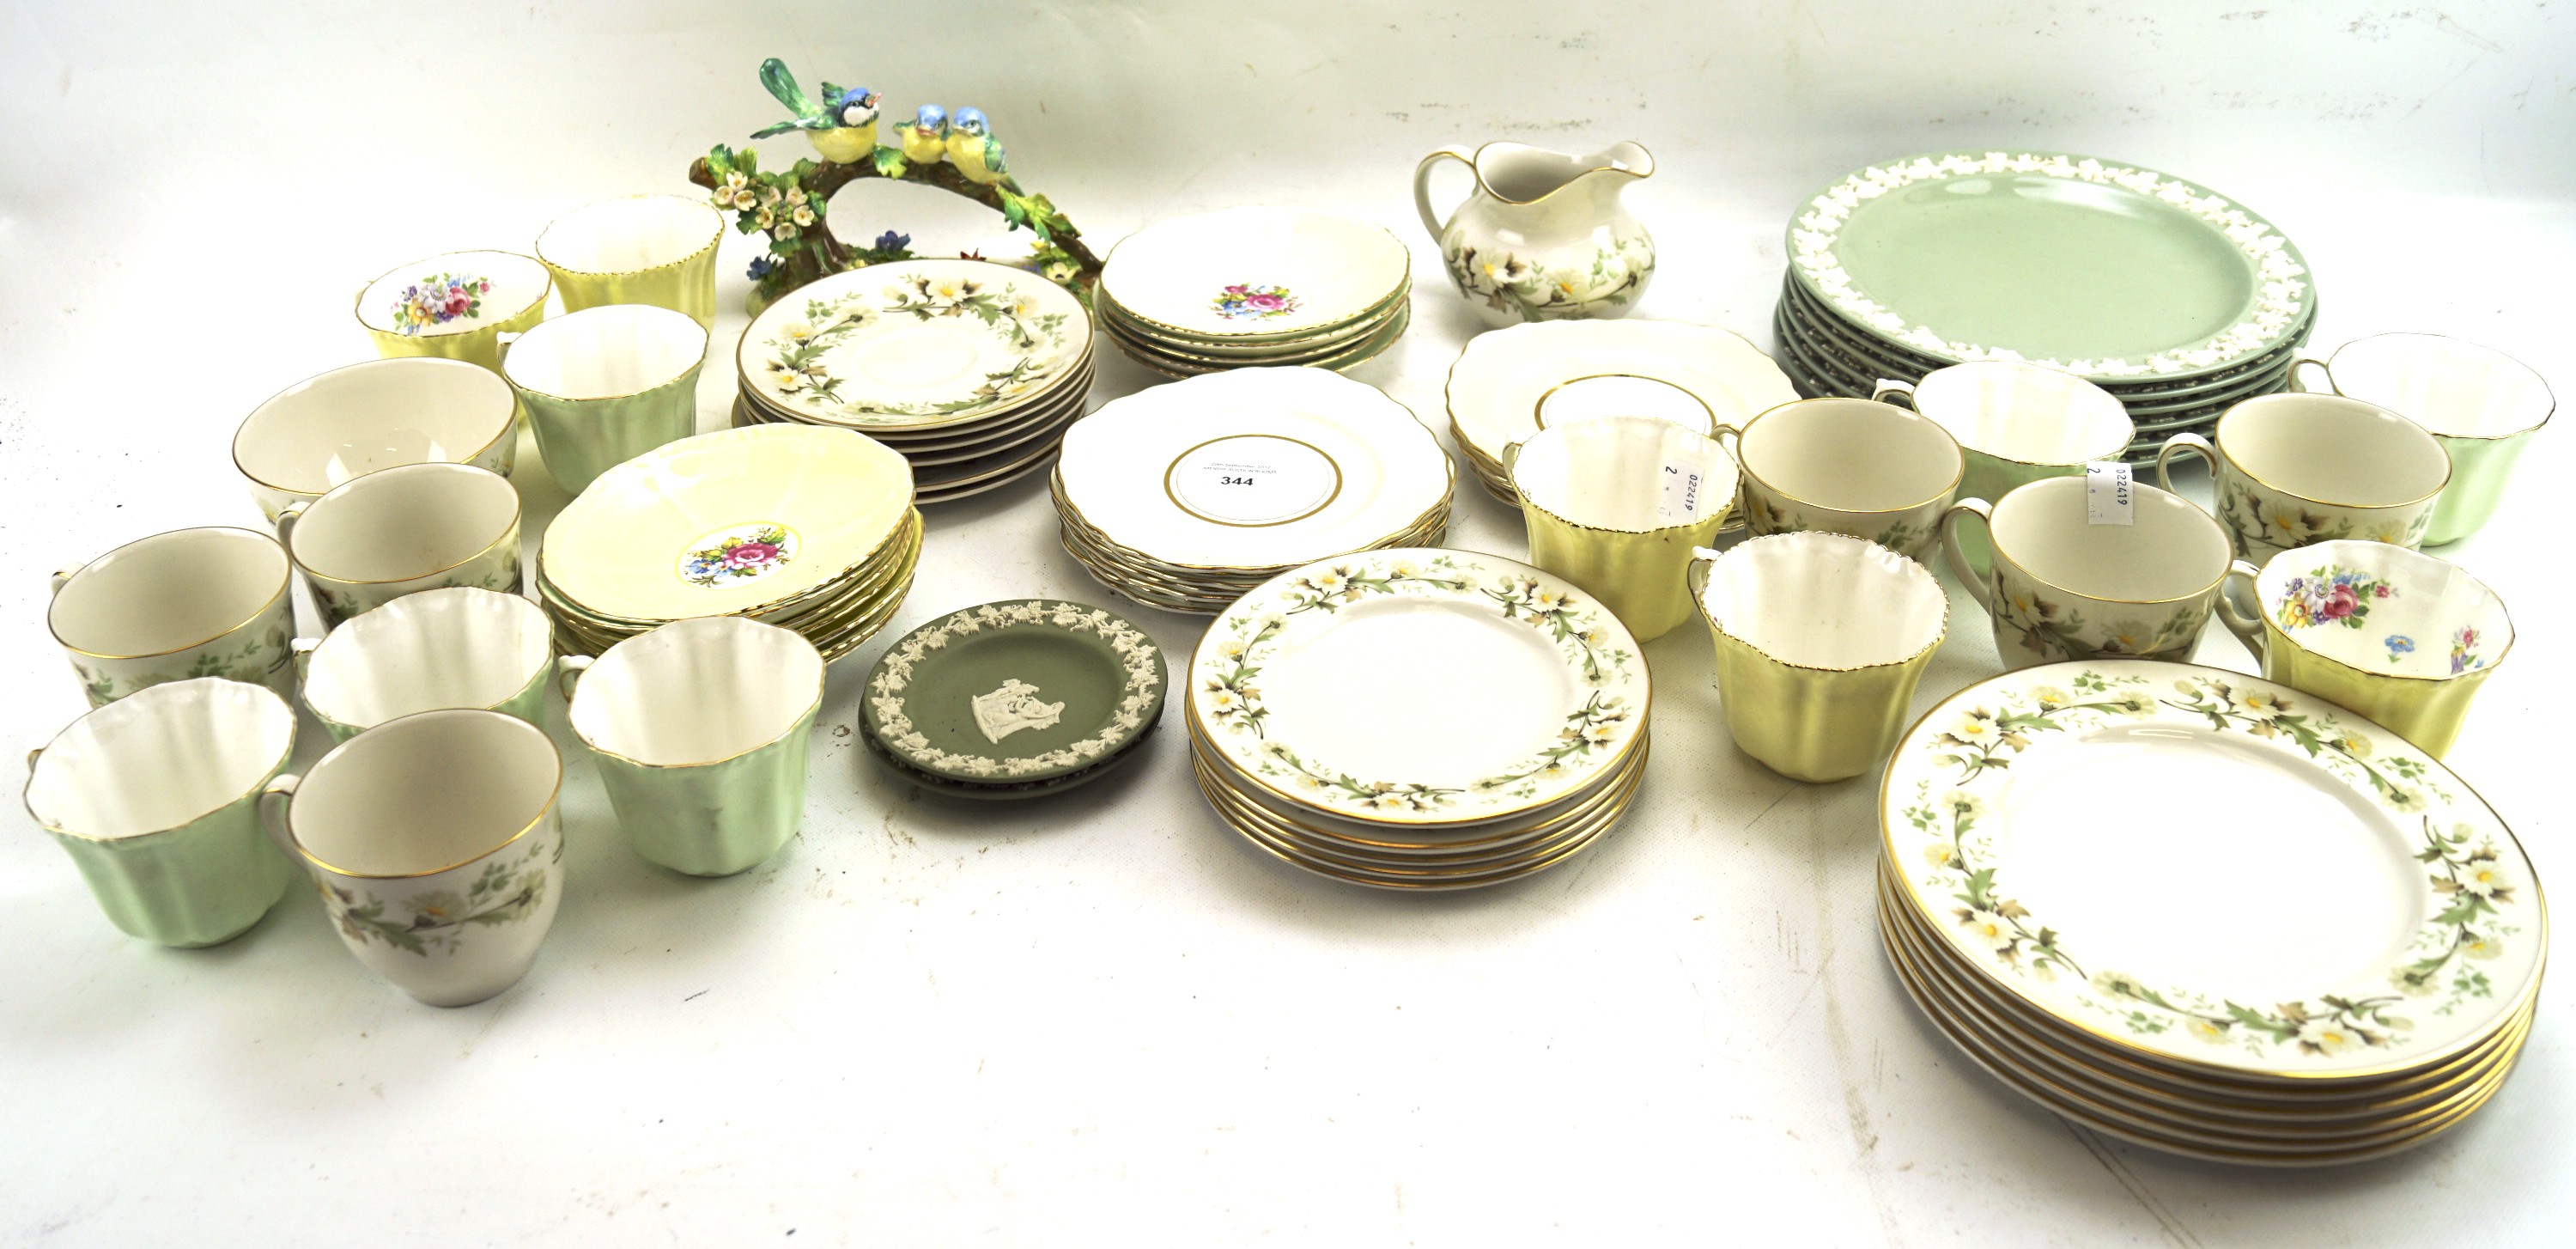 A Royal Doulton part tea service and an assortment of teacups and saucers.